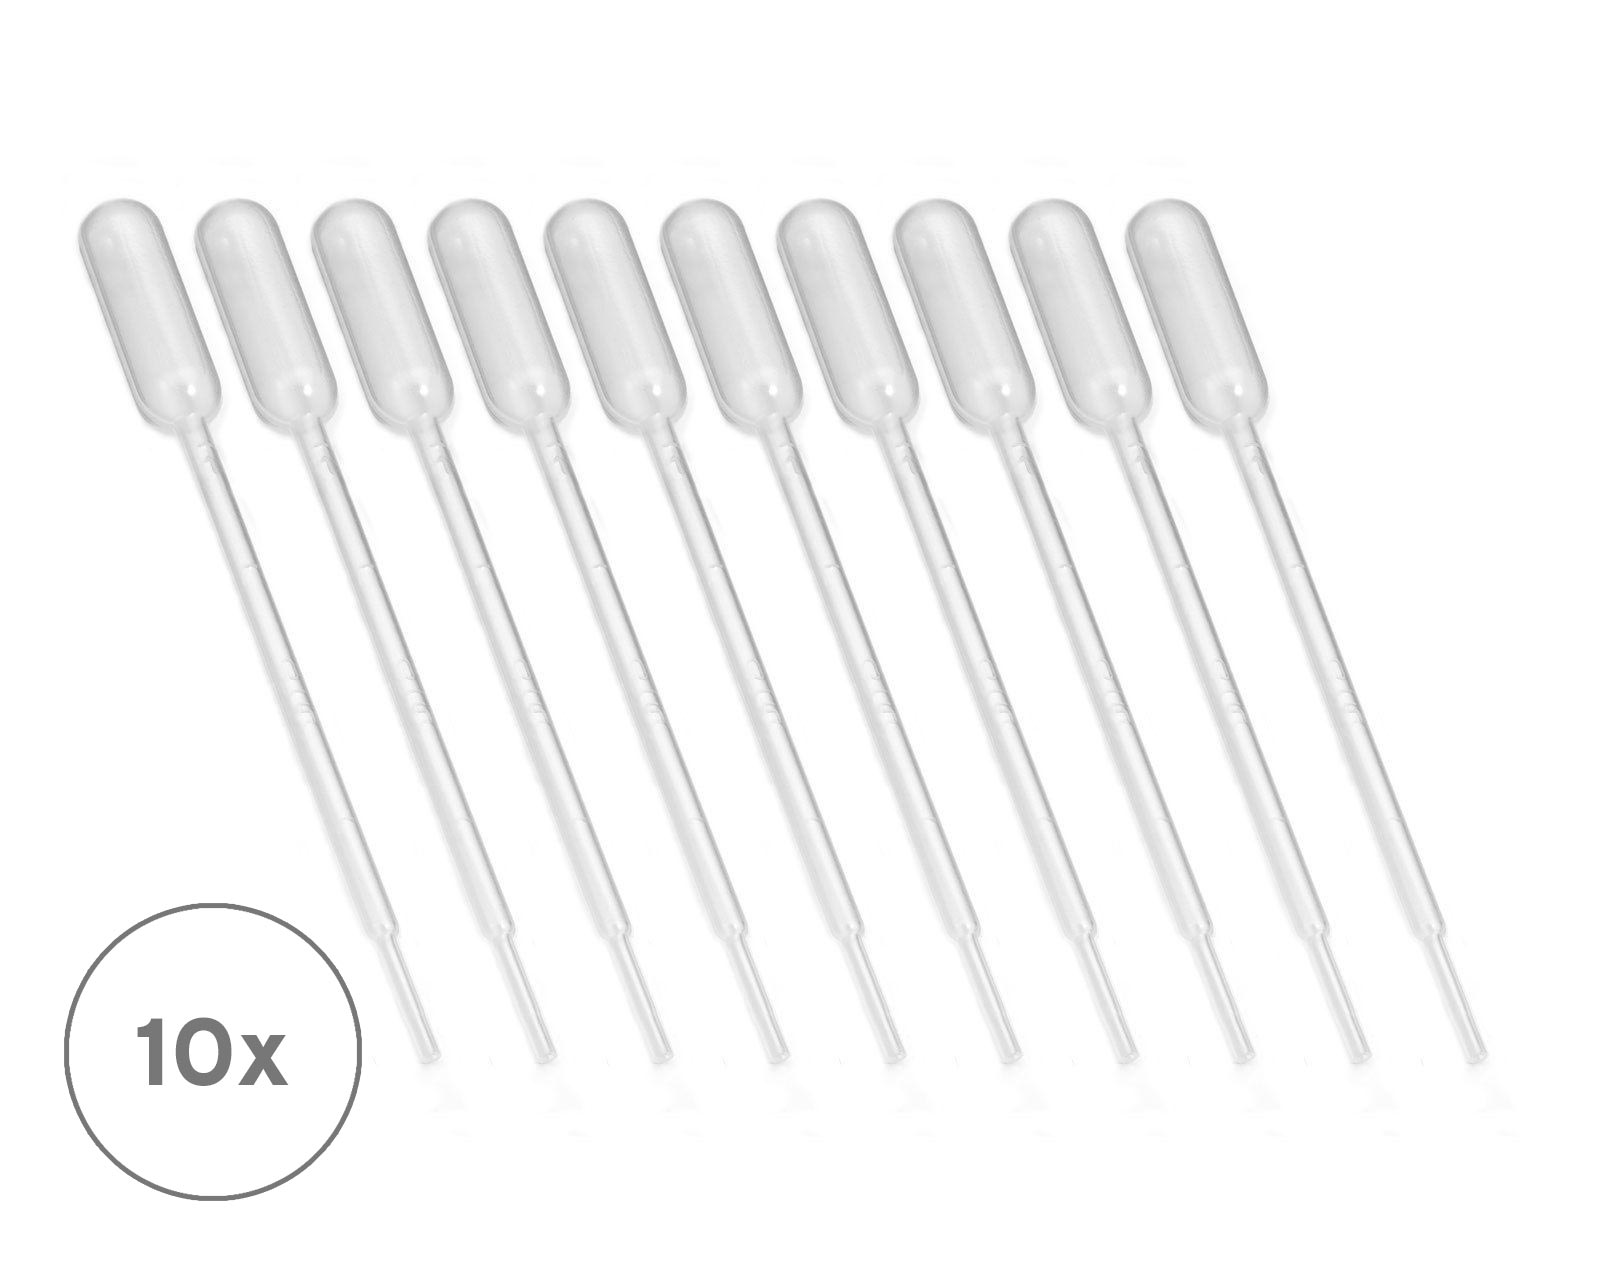 Transfer pipettes with dosage tip and plastic bulb, vol. 1 ml